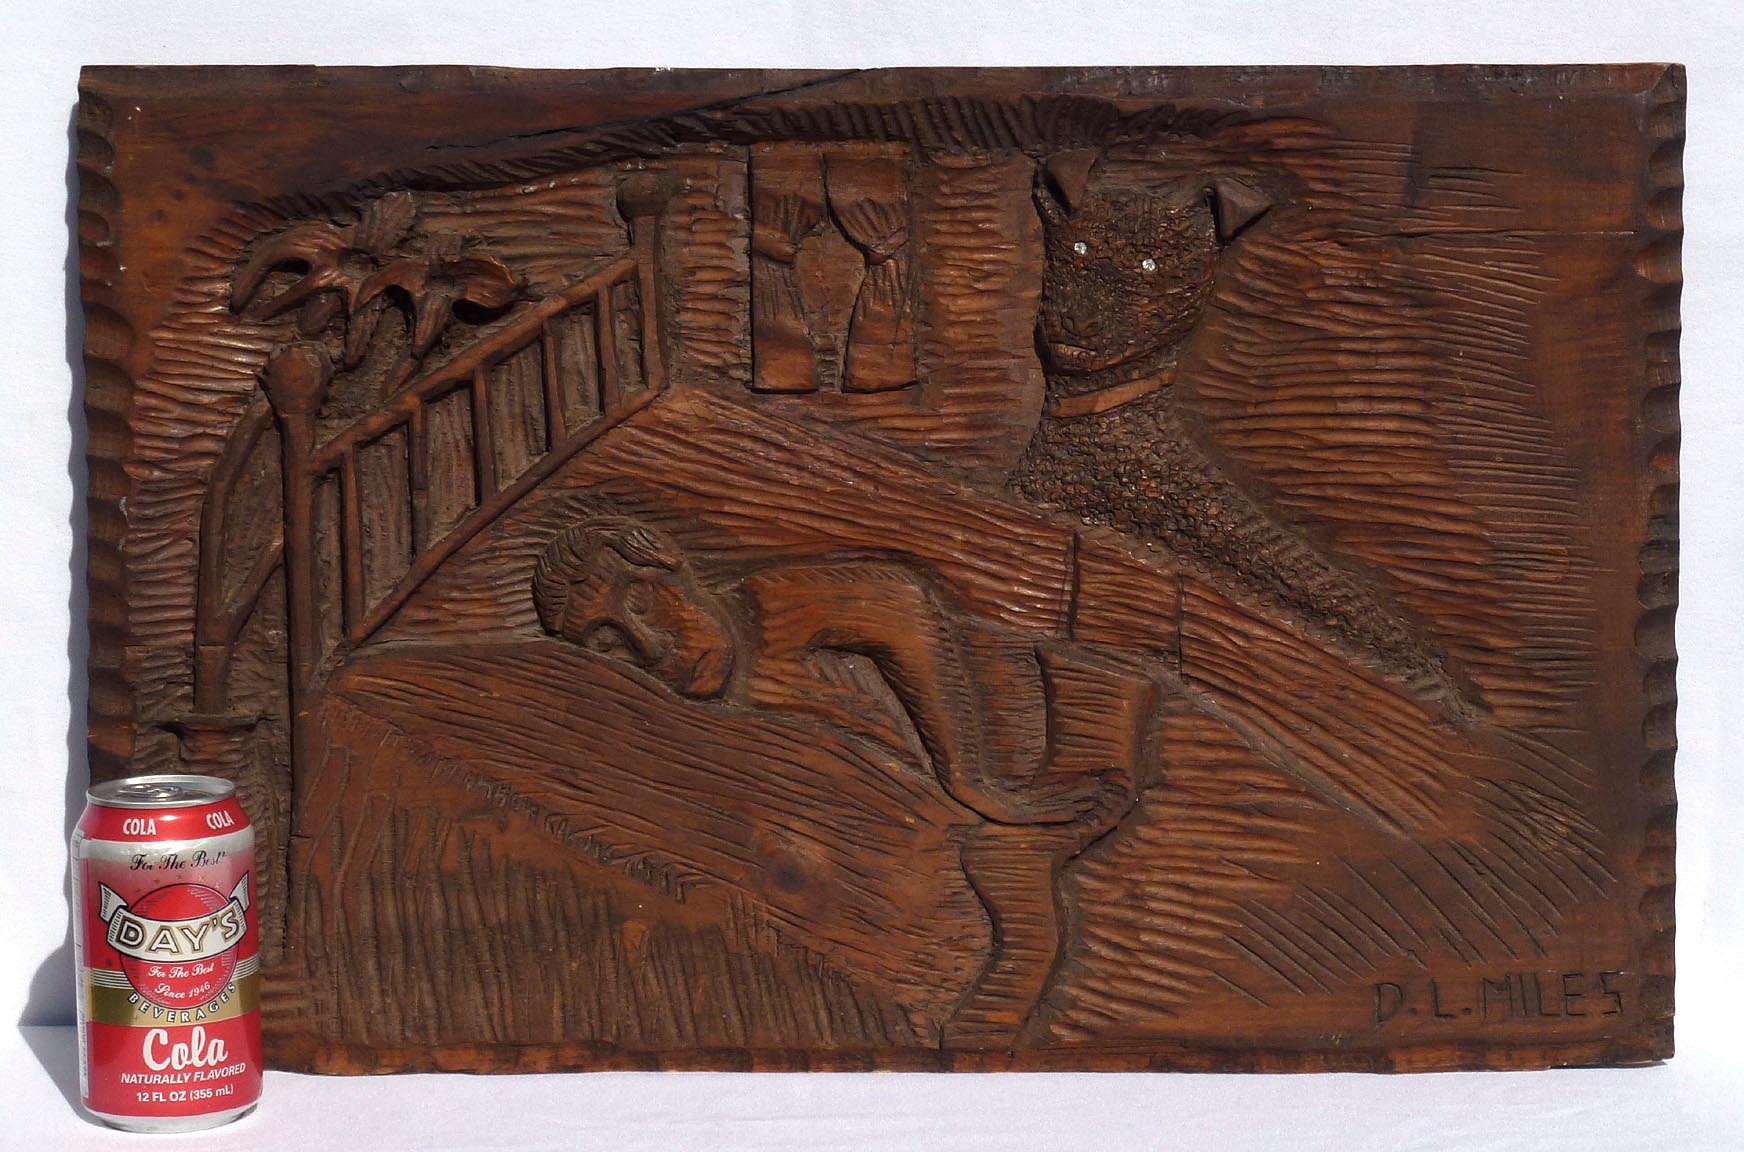 Carving of sleeping man with dog